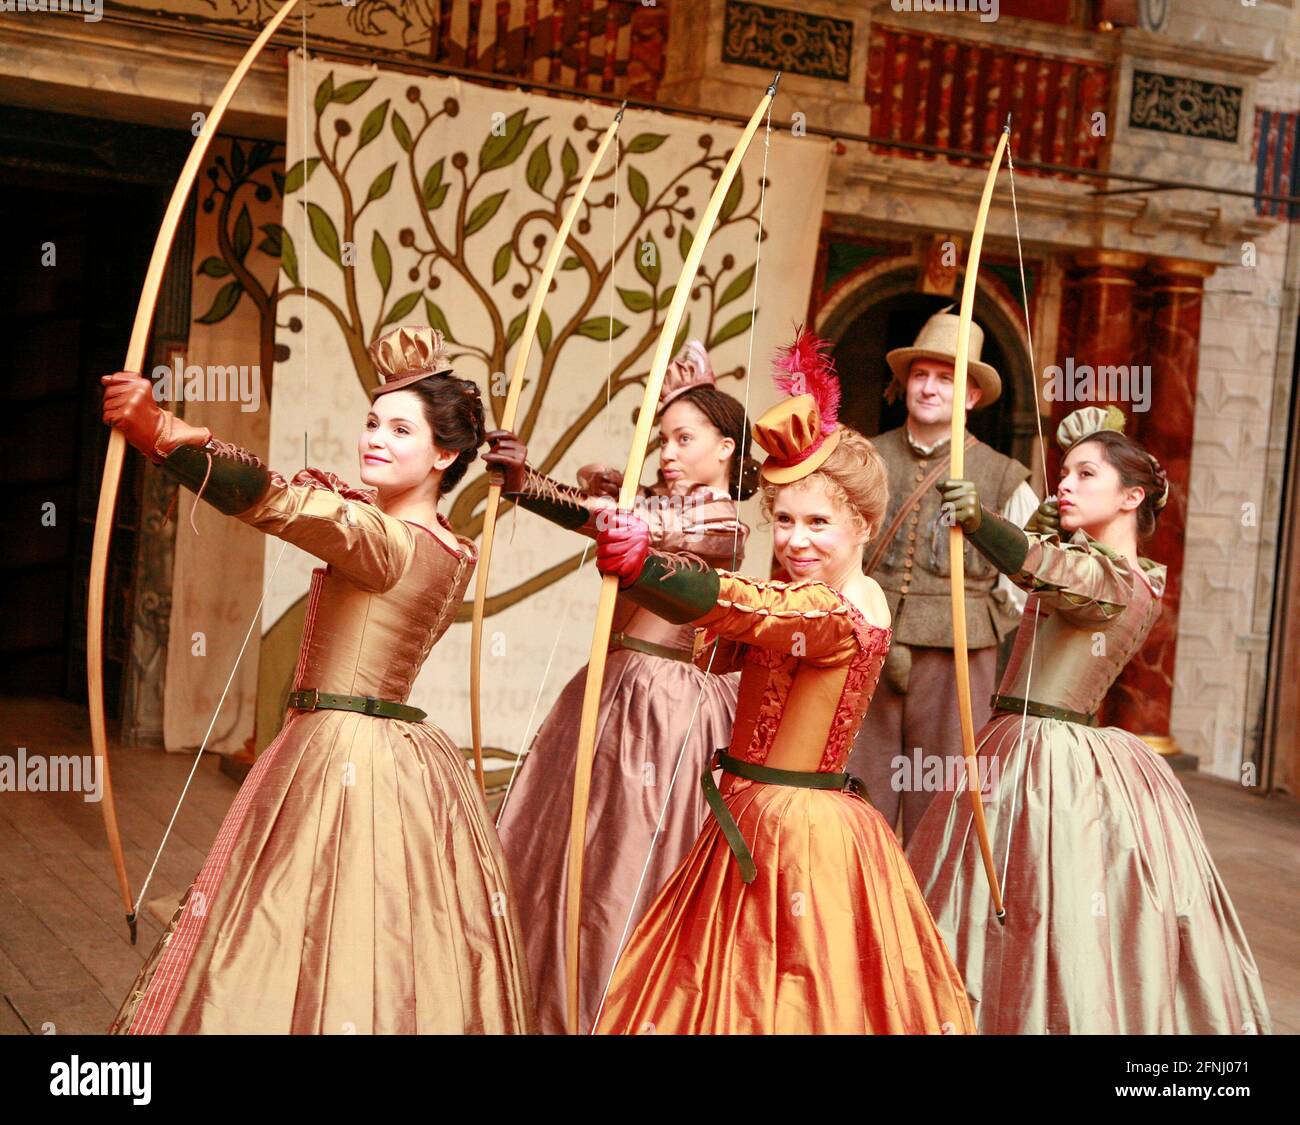 l-r: Gemma Arterton (Rosaline), Cush Jumbo (Maria), Michelle Terry (Princess of France), Andrew Vincent (Dull), Oona Chaplin (Katherine) in LOVE'S LABOUR'S LOST by Shakespeare at Shakespeare's Globe, London SE1  11/07/2007  design: Jonathan Fensom  fights: Renny Krupinsky  choreography: Sian Williams  director: Dominic Dromgoole Stock Photo